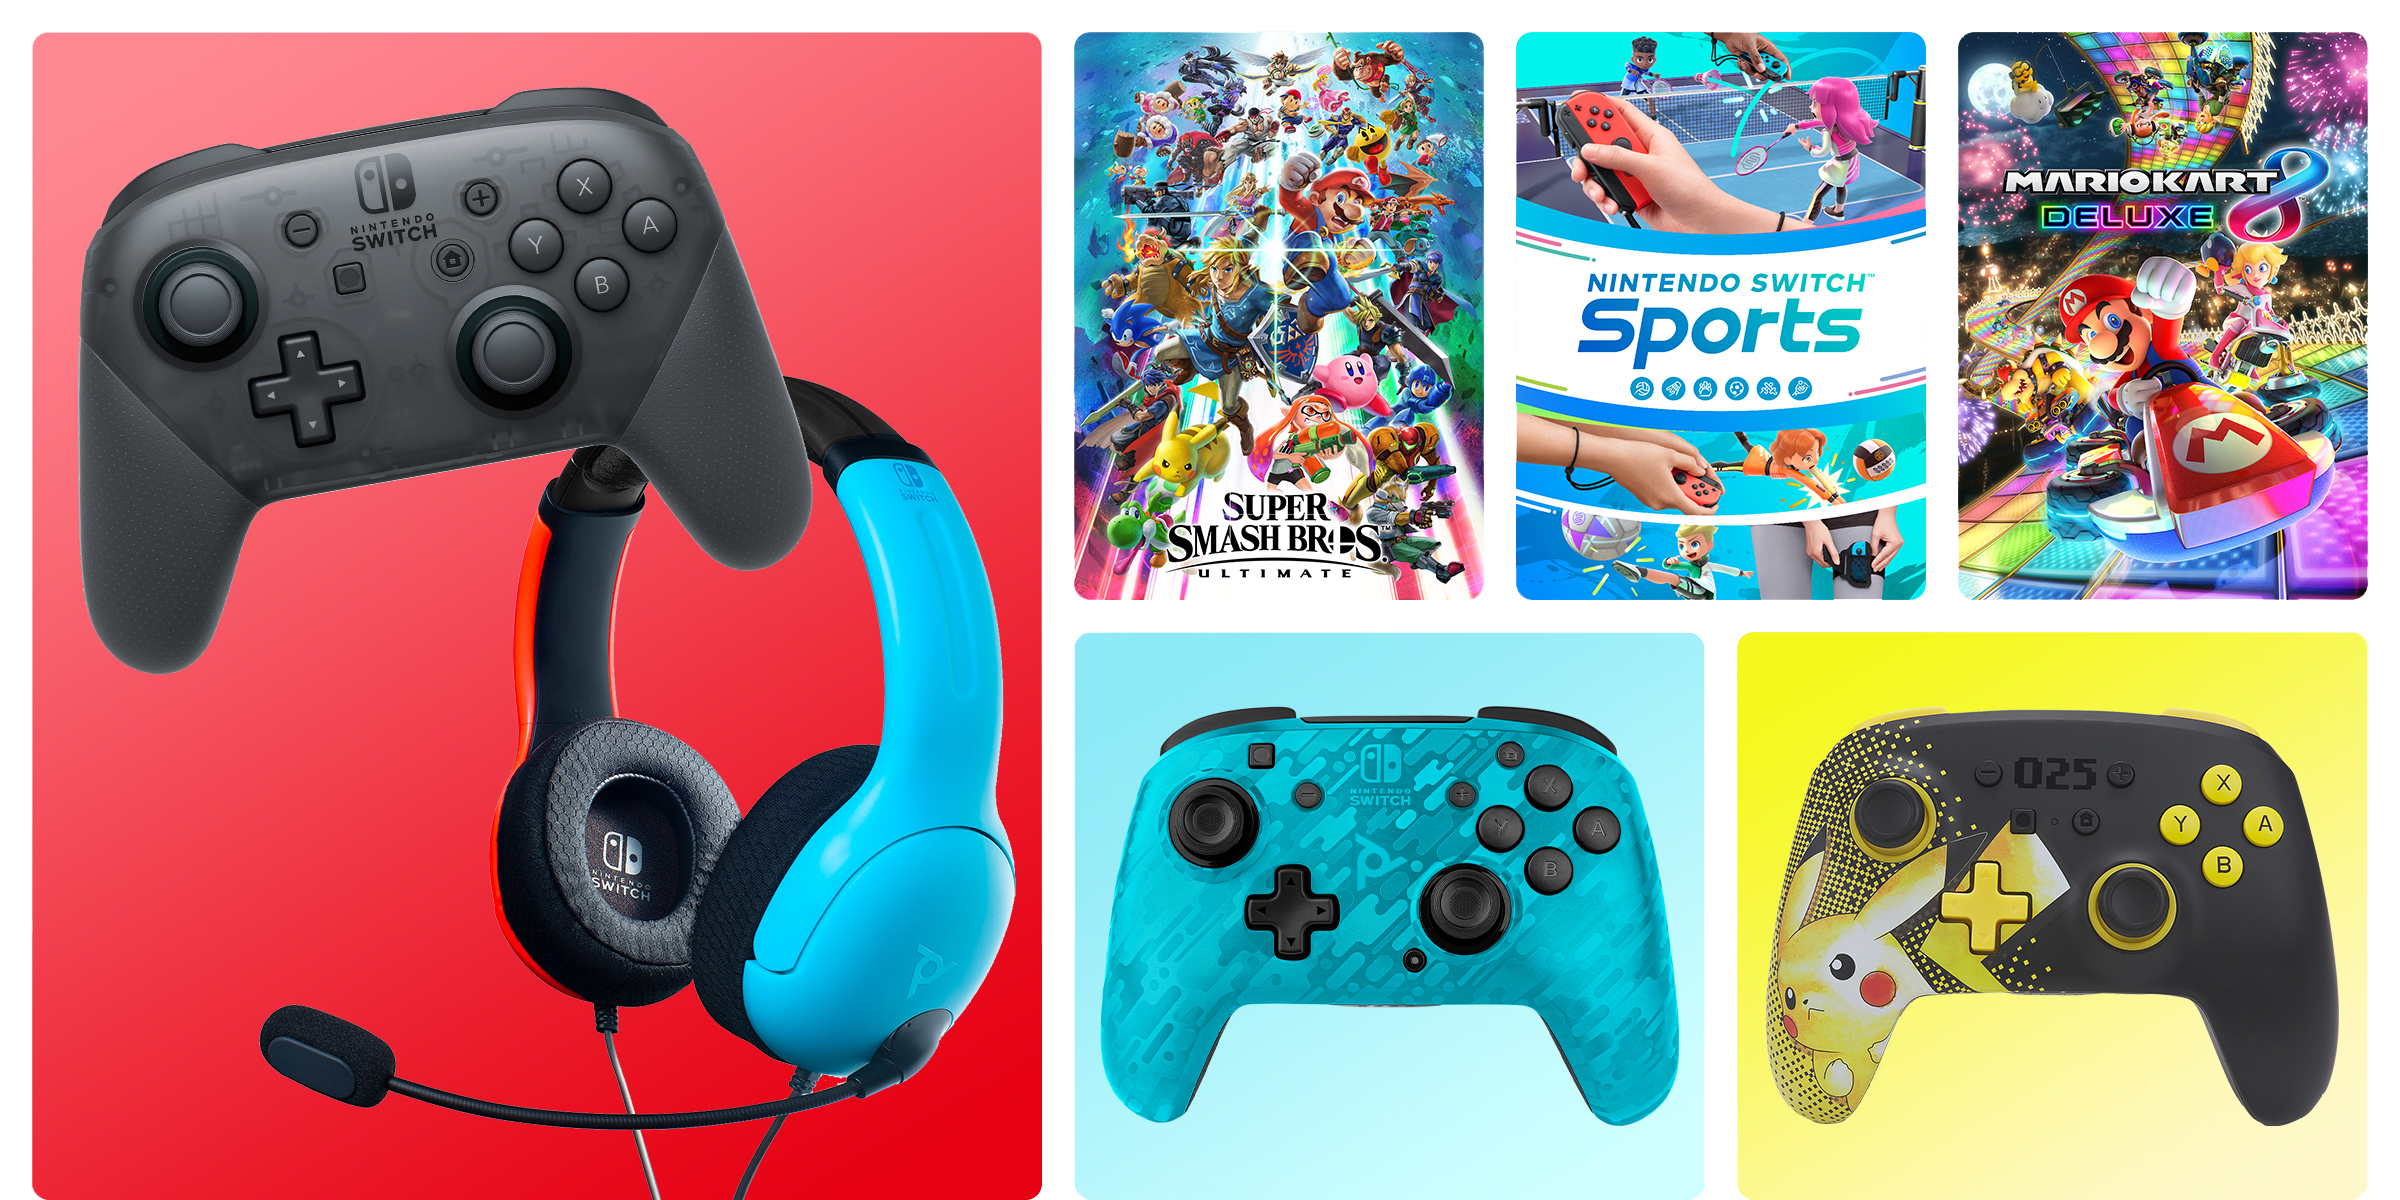 My Nintendo Store Competitive Games - Nintendo Pro Controller, Super Smash Brothers, Nintendo Switch Sports, Mario Kart Deluxe 8, wireless controllers